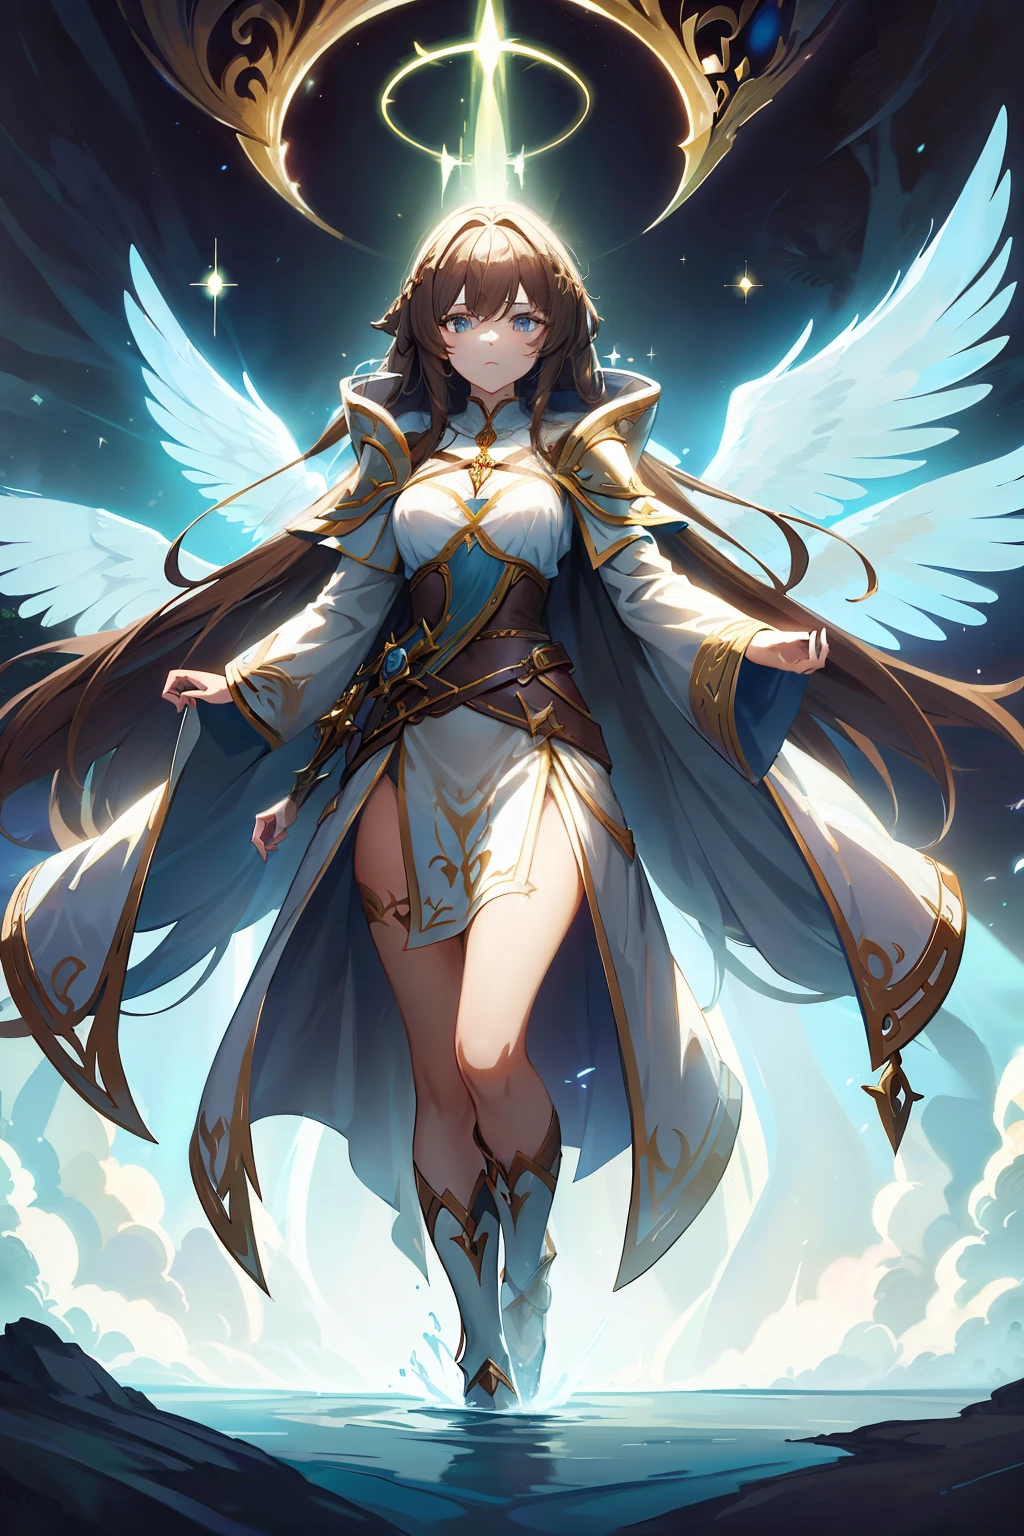 "Generates an anime-style image, inspired by genshin impact, 1 woman, full body, representing Seraphina Aelindë, a noble knight hospitaler of the Order of Saint John of Jerusalem and an elf of profound beauty. In the image, Seraphina is standing standing in an ancient Forest, surrounded by tall and mysterious trees. Her long, luminous brown hair falls in intricate braids over her shoulders, with golden sparkles that magically capture the light. Her eyes of an intense and heavenly blue look with compassion and determination towards the horizon. He wears a black robe with a white pate cross on the left chest, and a black hooded cloak billowing slightly in the forest breeze. His hands gracefully hold the hilt of a sword, symbolizing his bravery and commitment with protection. The image captures Seraphina's serene and noble presence, as she radiates a deep connection to nature and the magic that surrounds her."